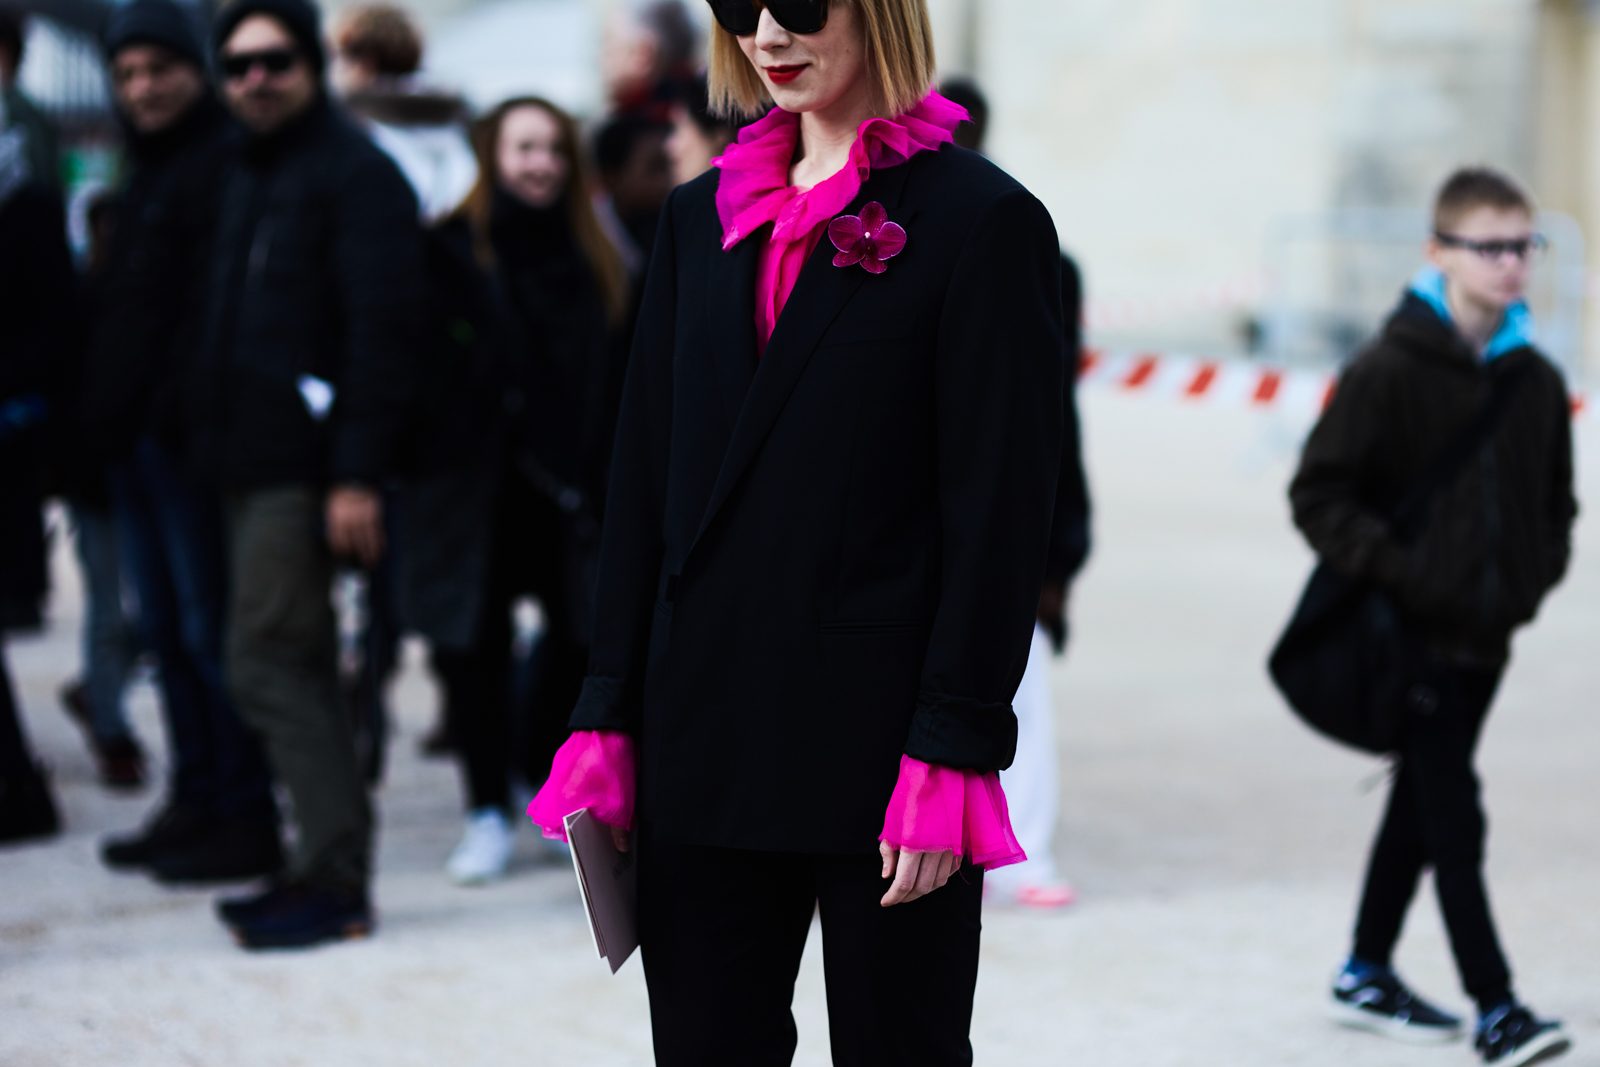 Designer Vika Gazinskaya wearing a black suit and a fuchsia blouse before the Valentino Fall/Winter 2016-2017 fashion show in Paris, France 